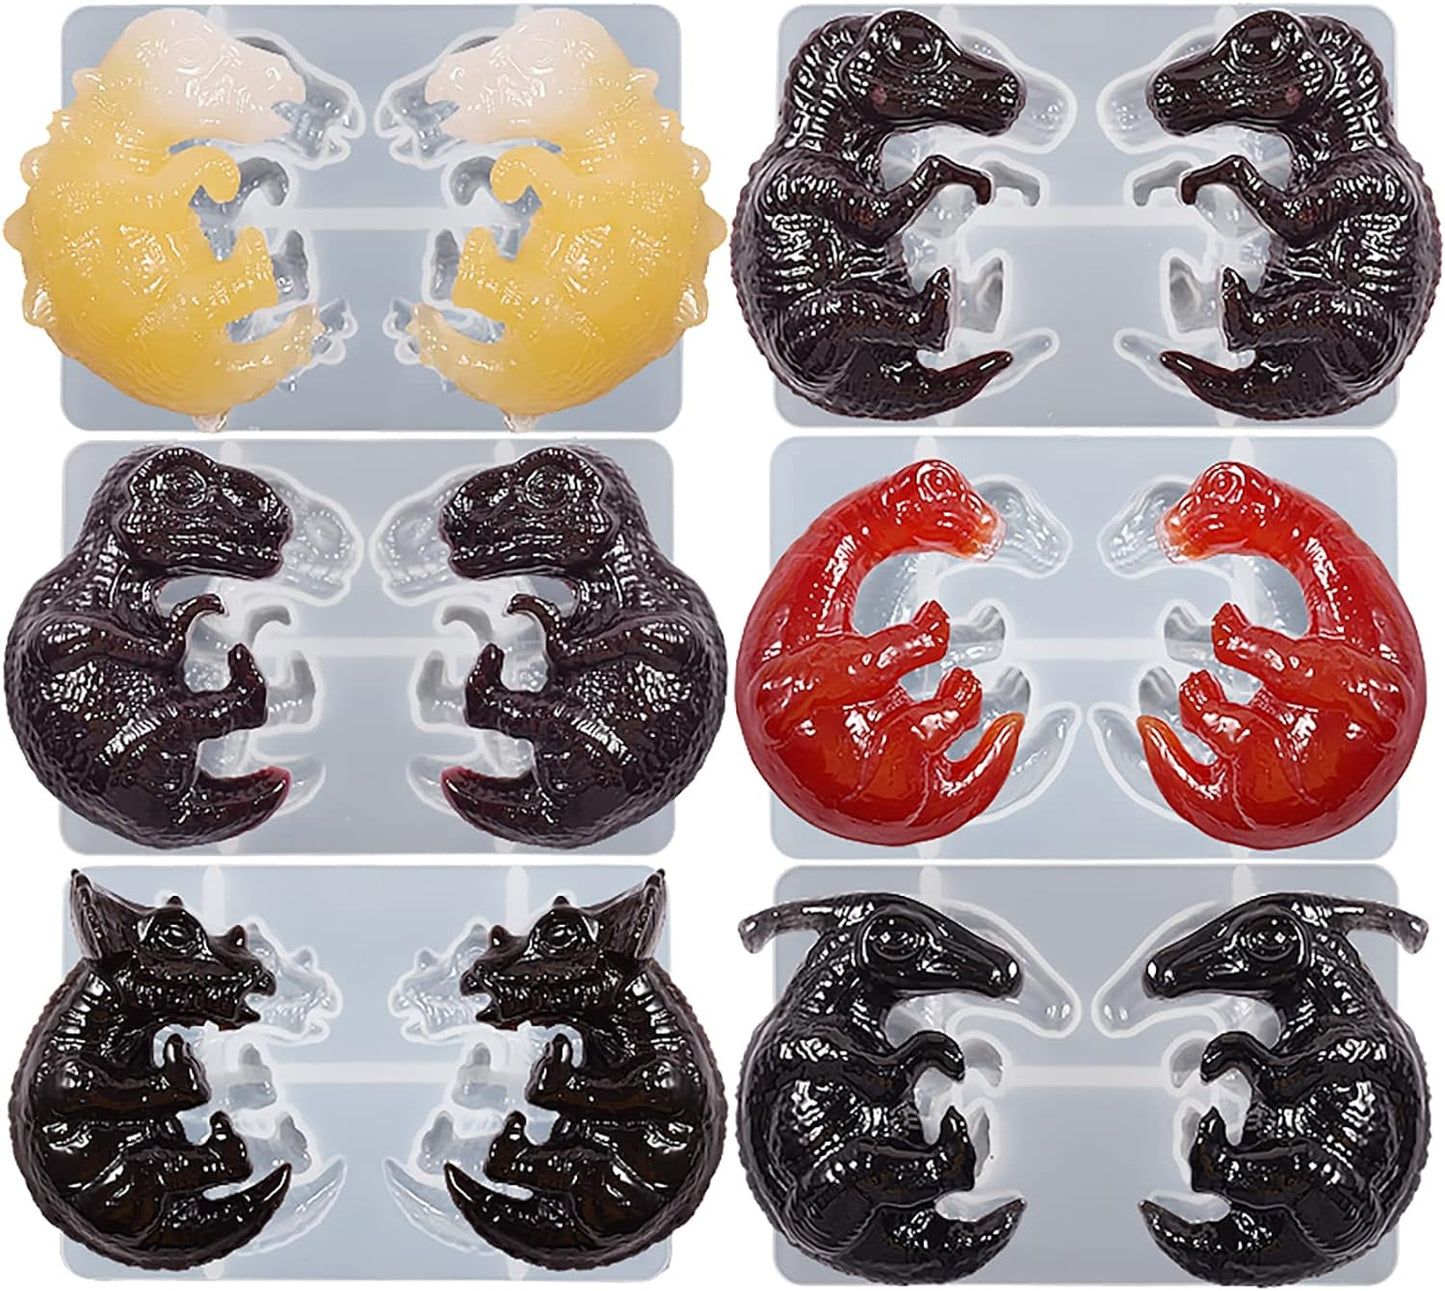 7 Pcs Dragon Shape Earring Mold Dragon Egg Mold Earring Pendant Mold Earring Resin Mold Clay Mold Candle Making Molds Craft Supplies 3D Mold Silicone Mold for Resin Resin Casting Mold